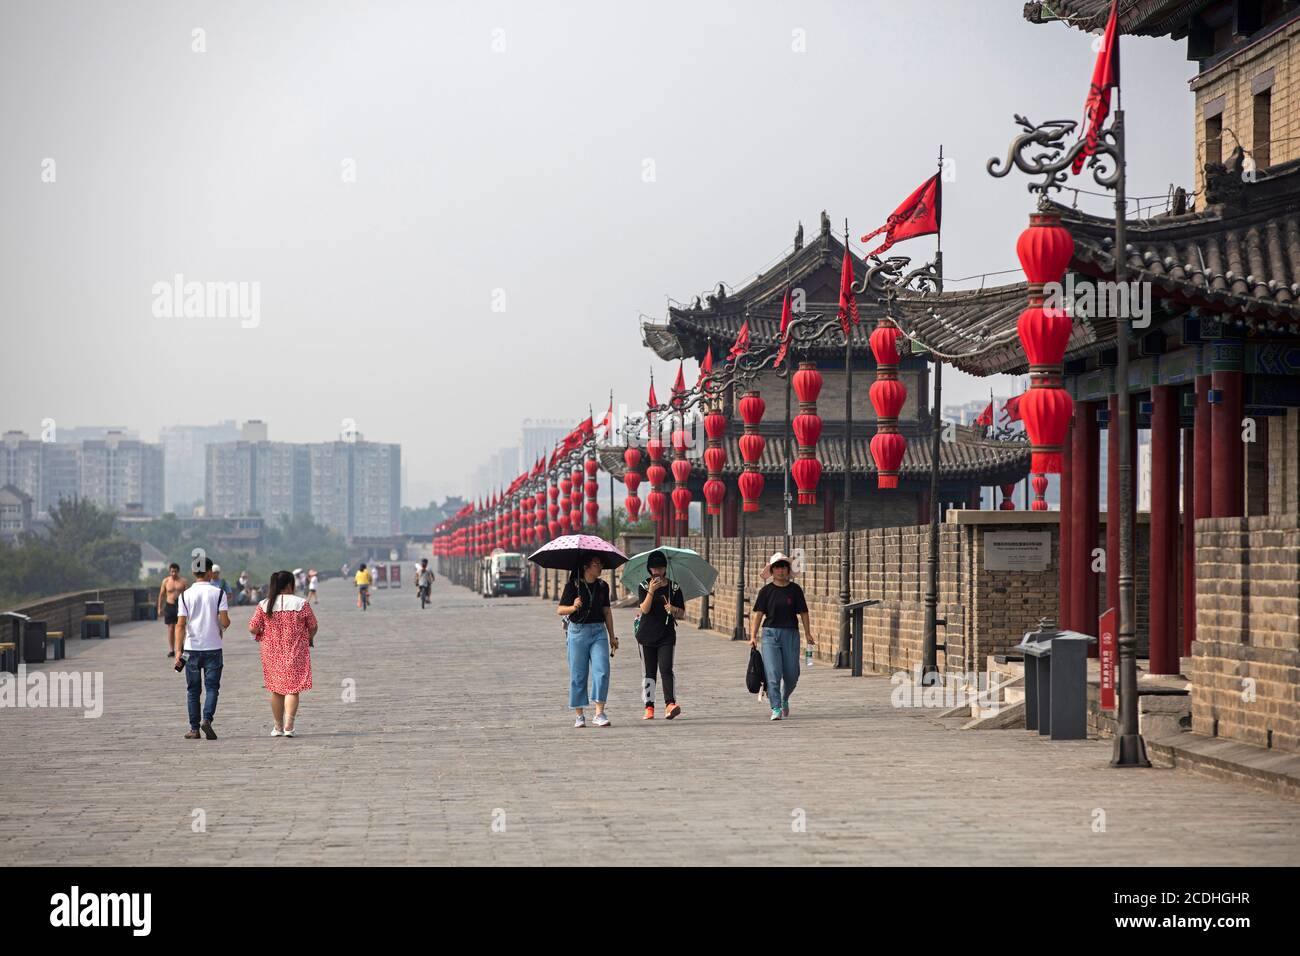 Chinese tourists and red lanterns along the city walls / ramparts in Xi'an / Sian, Yanta District, Shaanxi, China Stock Photo